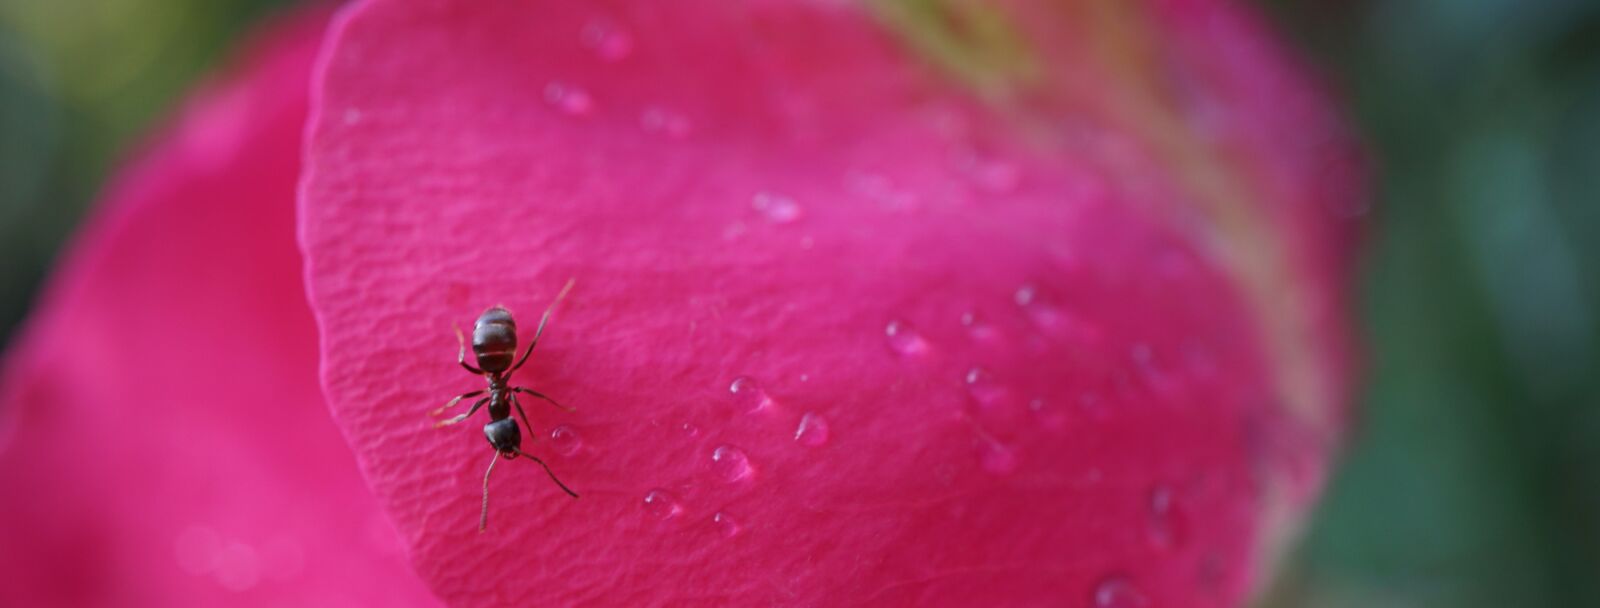 Sony a6000 + Sony E 30mm F3.5 Macro sample photo. Ant, rose petals, insect photography